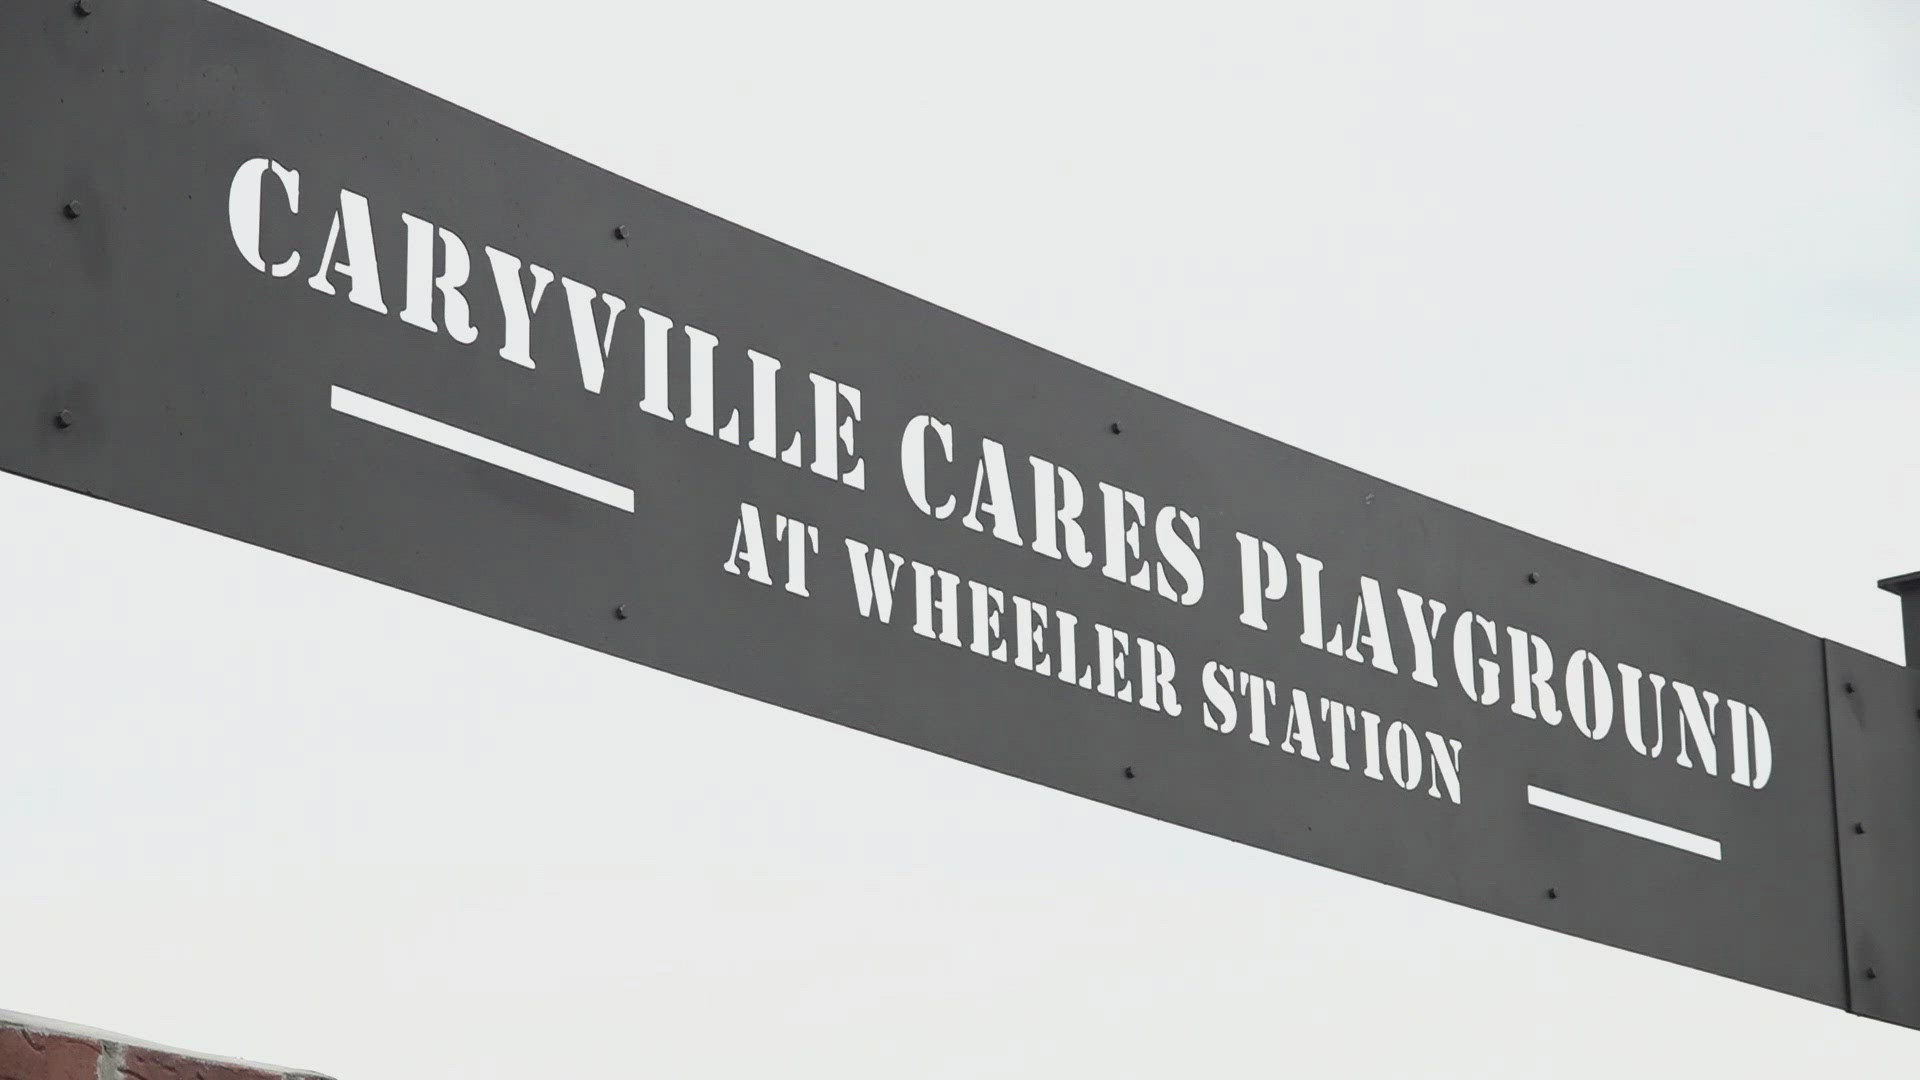 The "Caryville Cares" project took years to complete, and on Friday the group behind it celebrated the playground's grand opening.